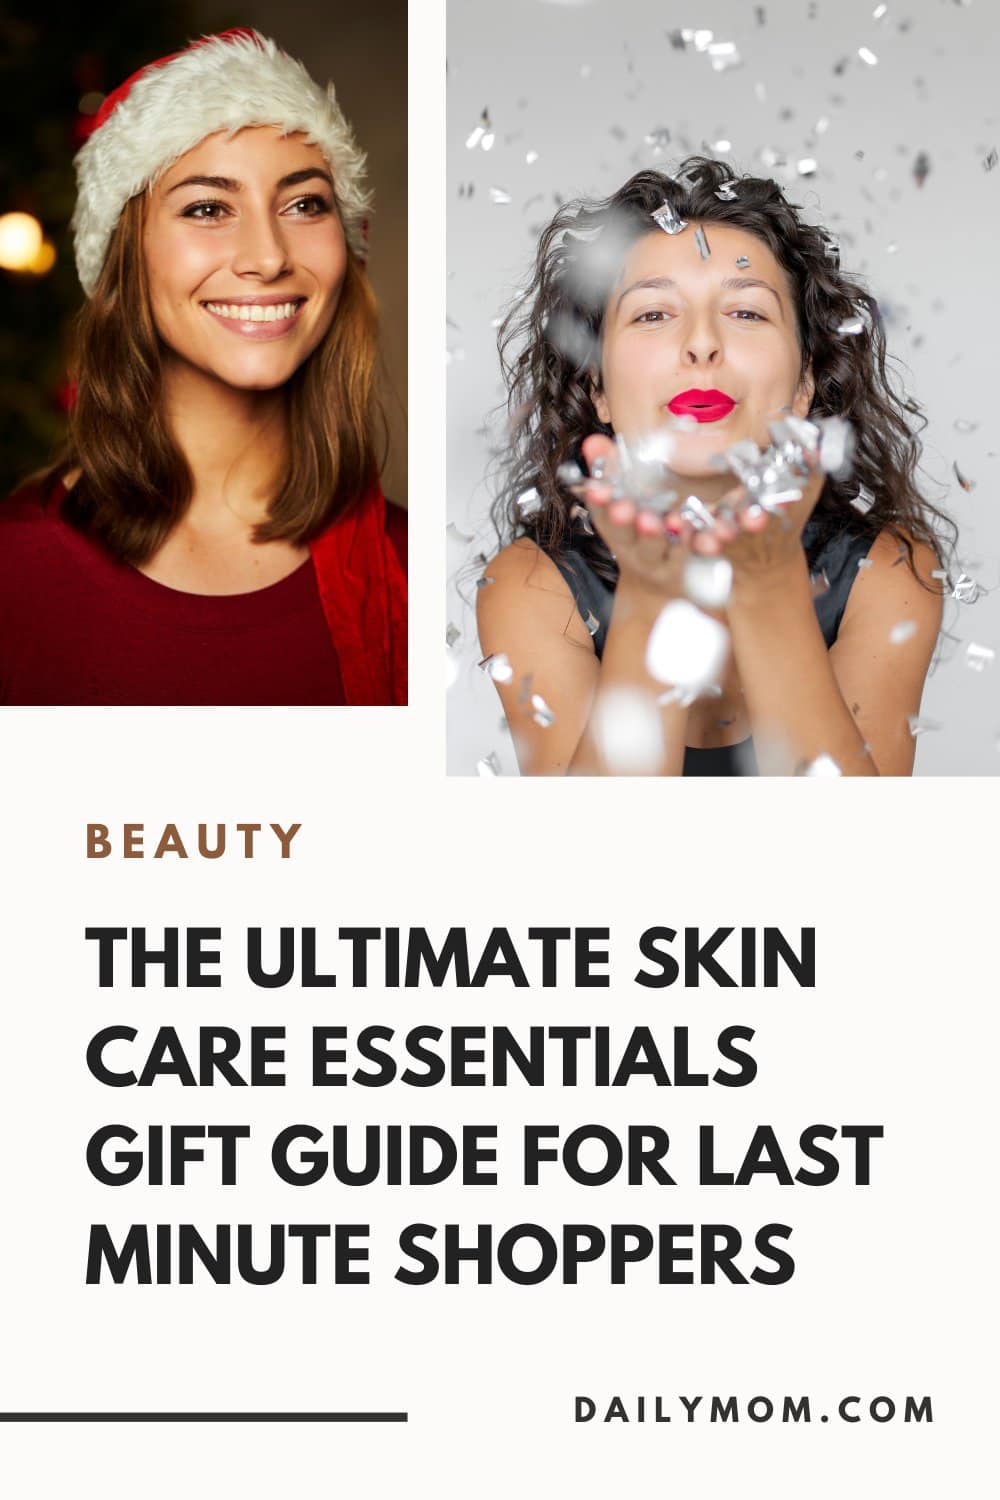 The Ultimate Skin Care Essentials Gift Guide For Last-Minute Shoppers 84 Daily Mom, Magazine For Families